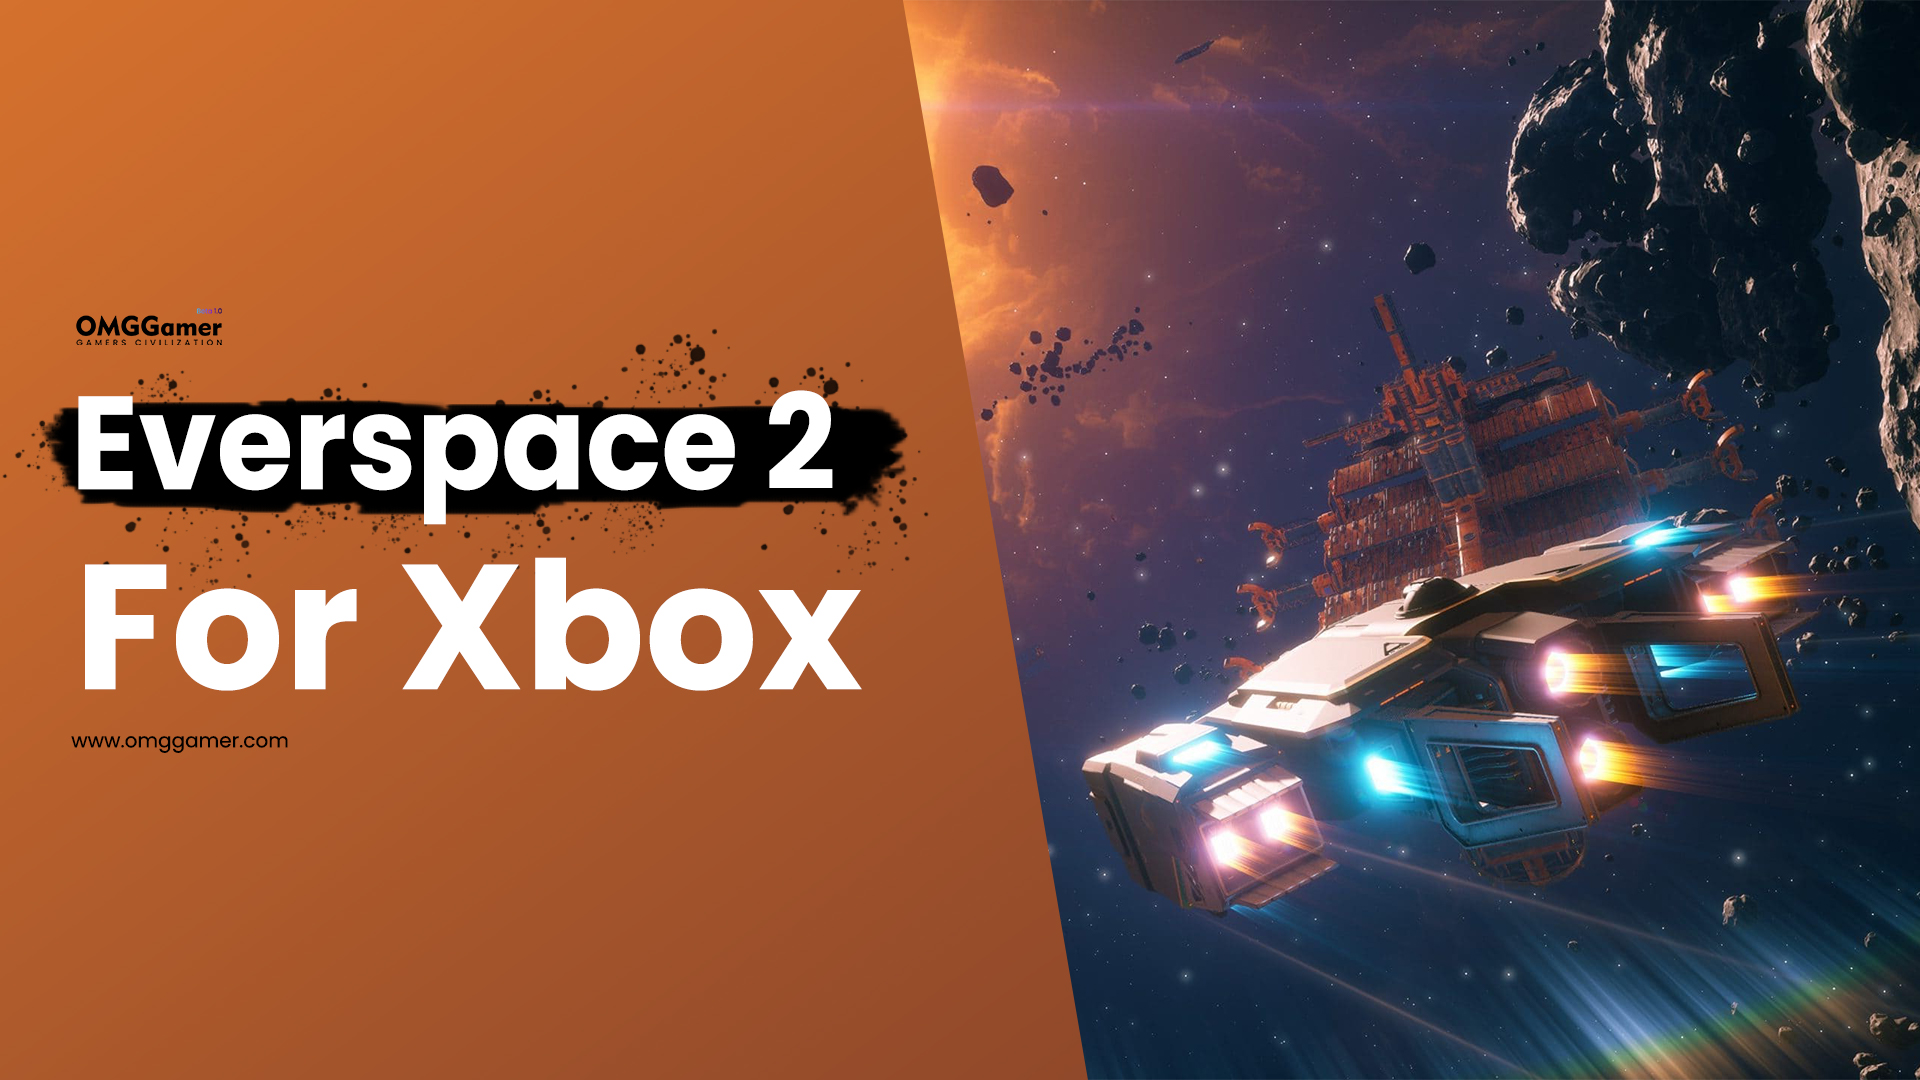 Everspace 2 for Xbox